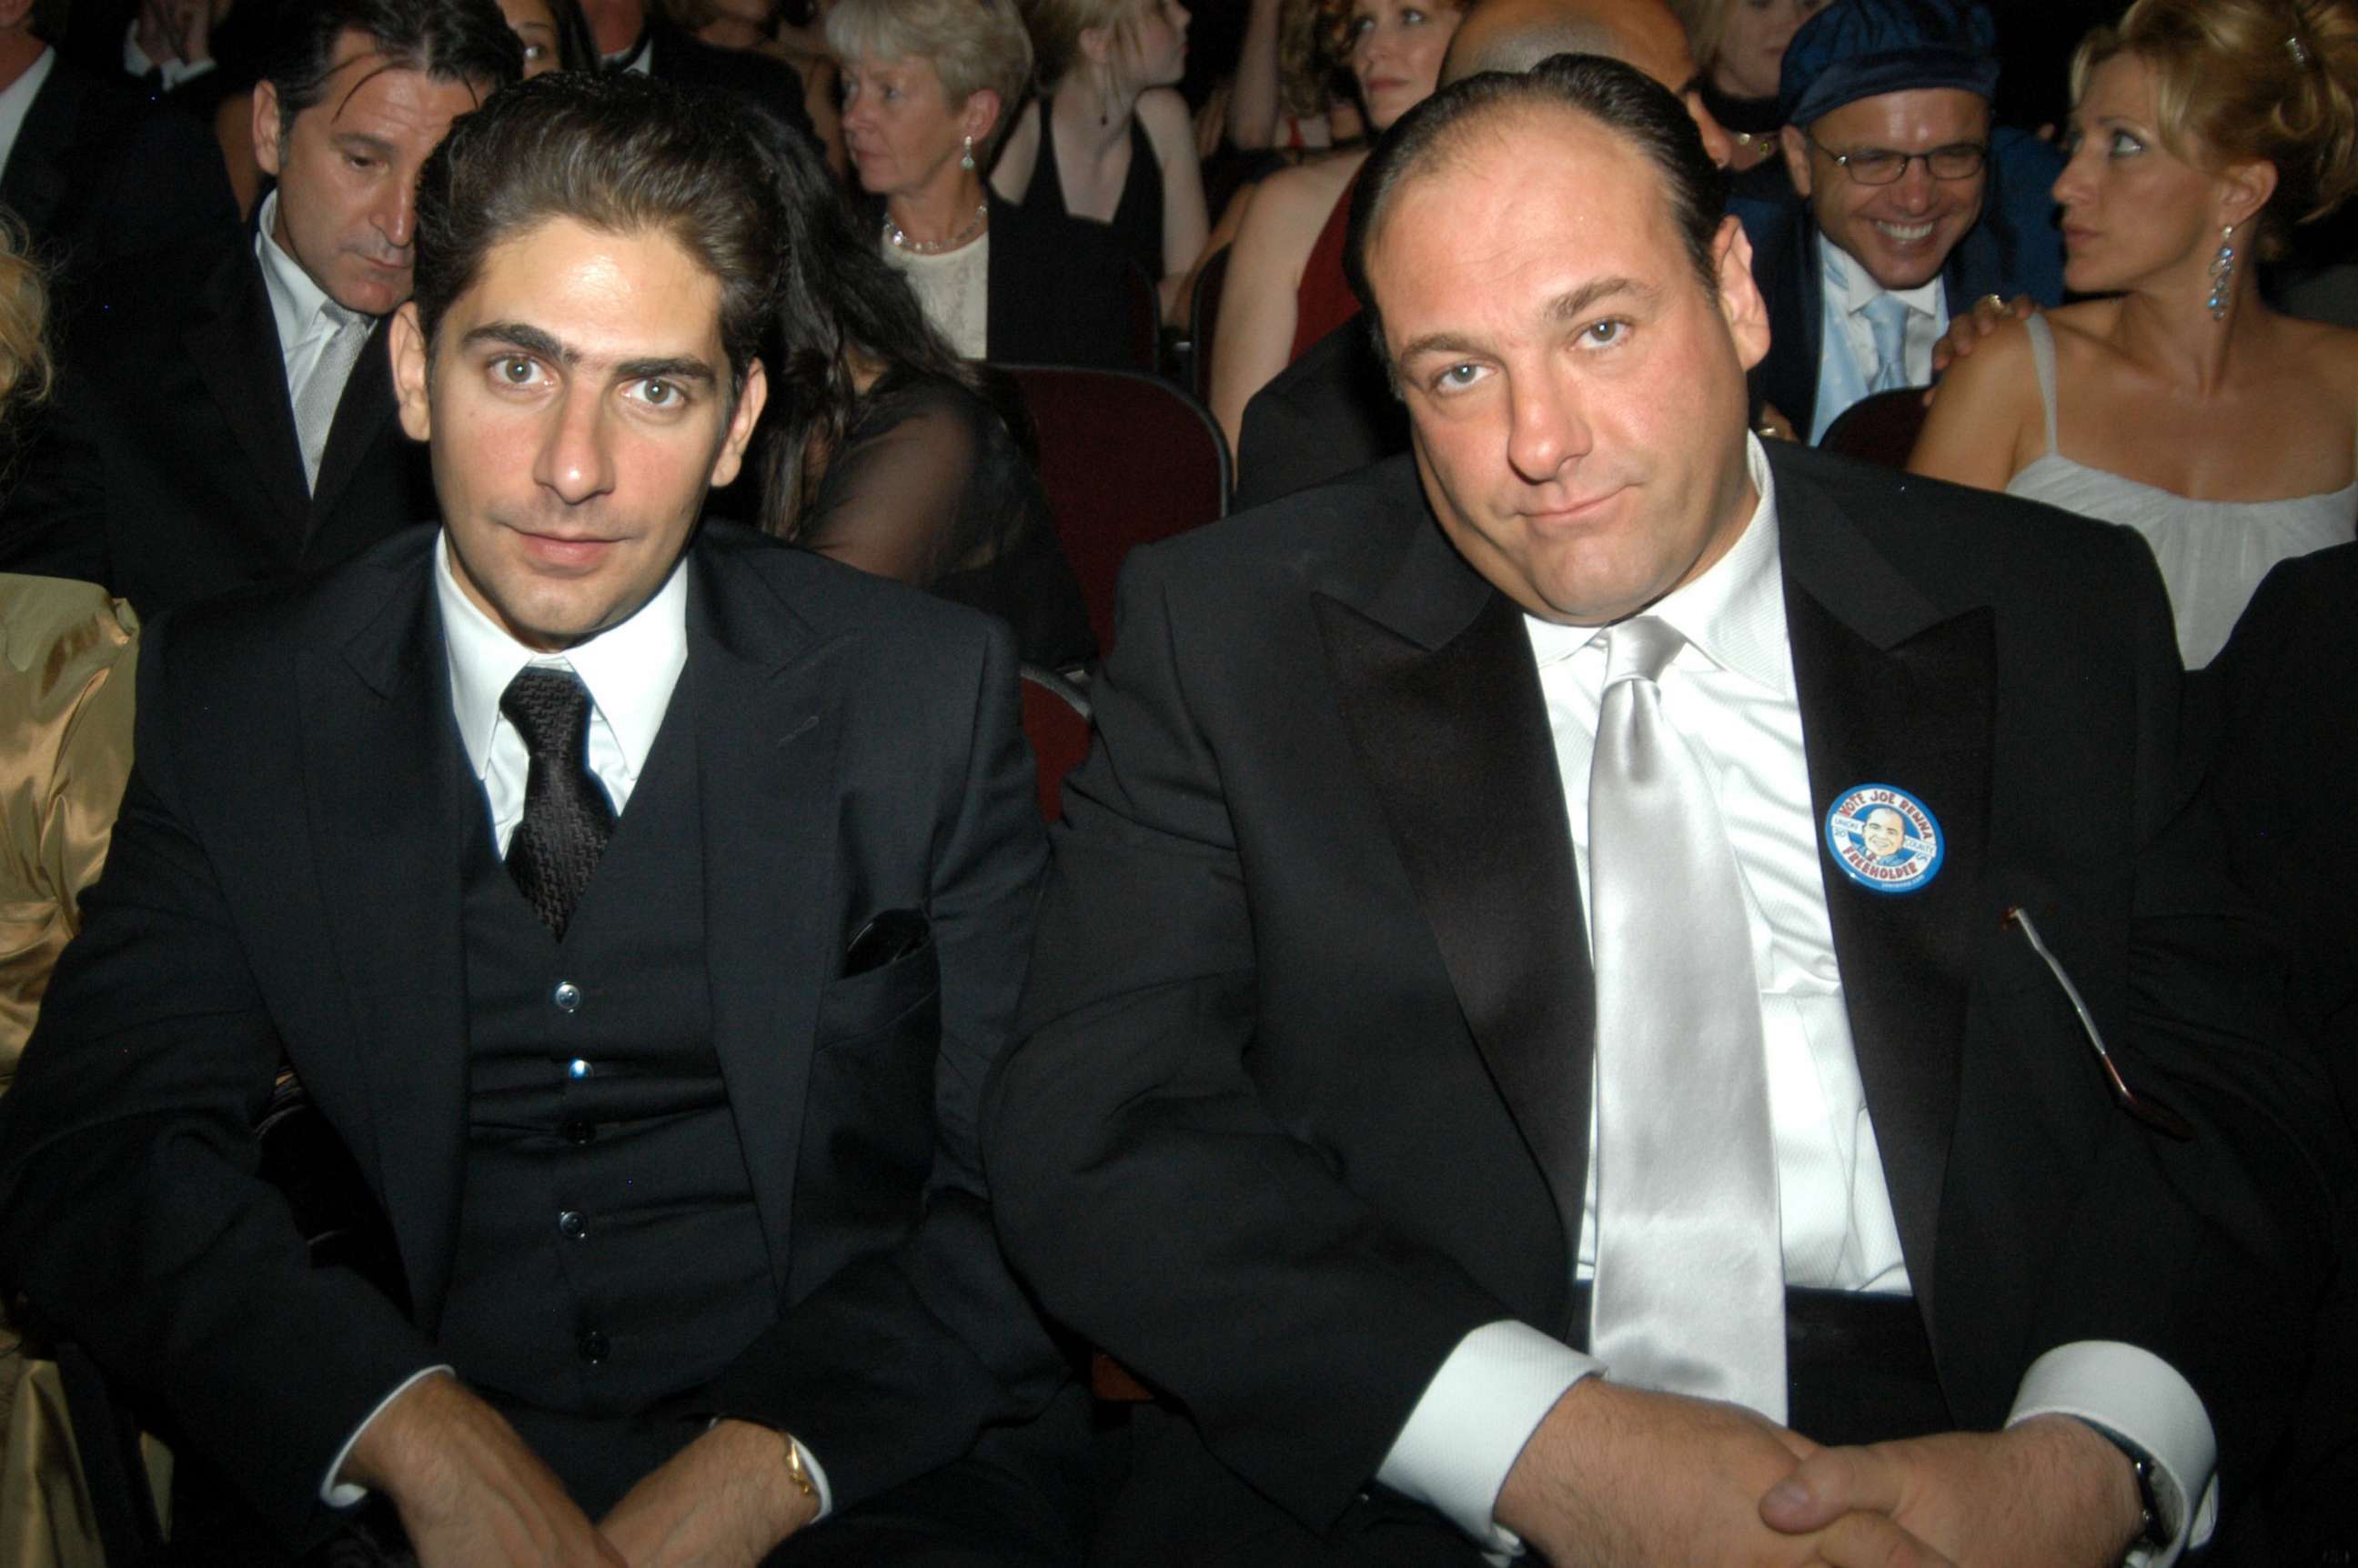 PHOTO: Michael Imperioli and James Gandolfini attend the 55th Annual Primetime Emmy Awards in Los Angeles, Calif. Sept. 21, 2003.